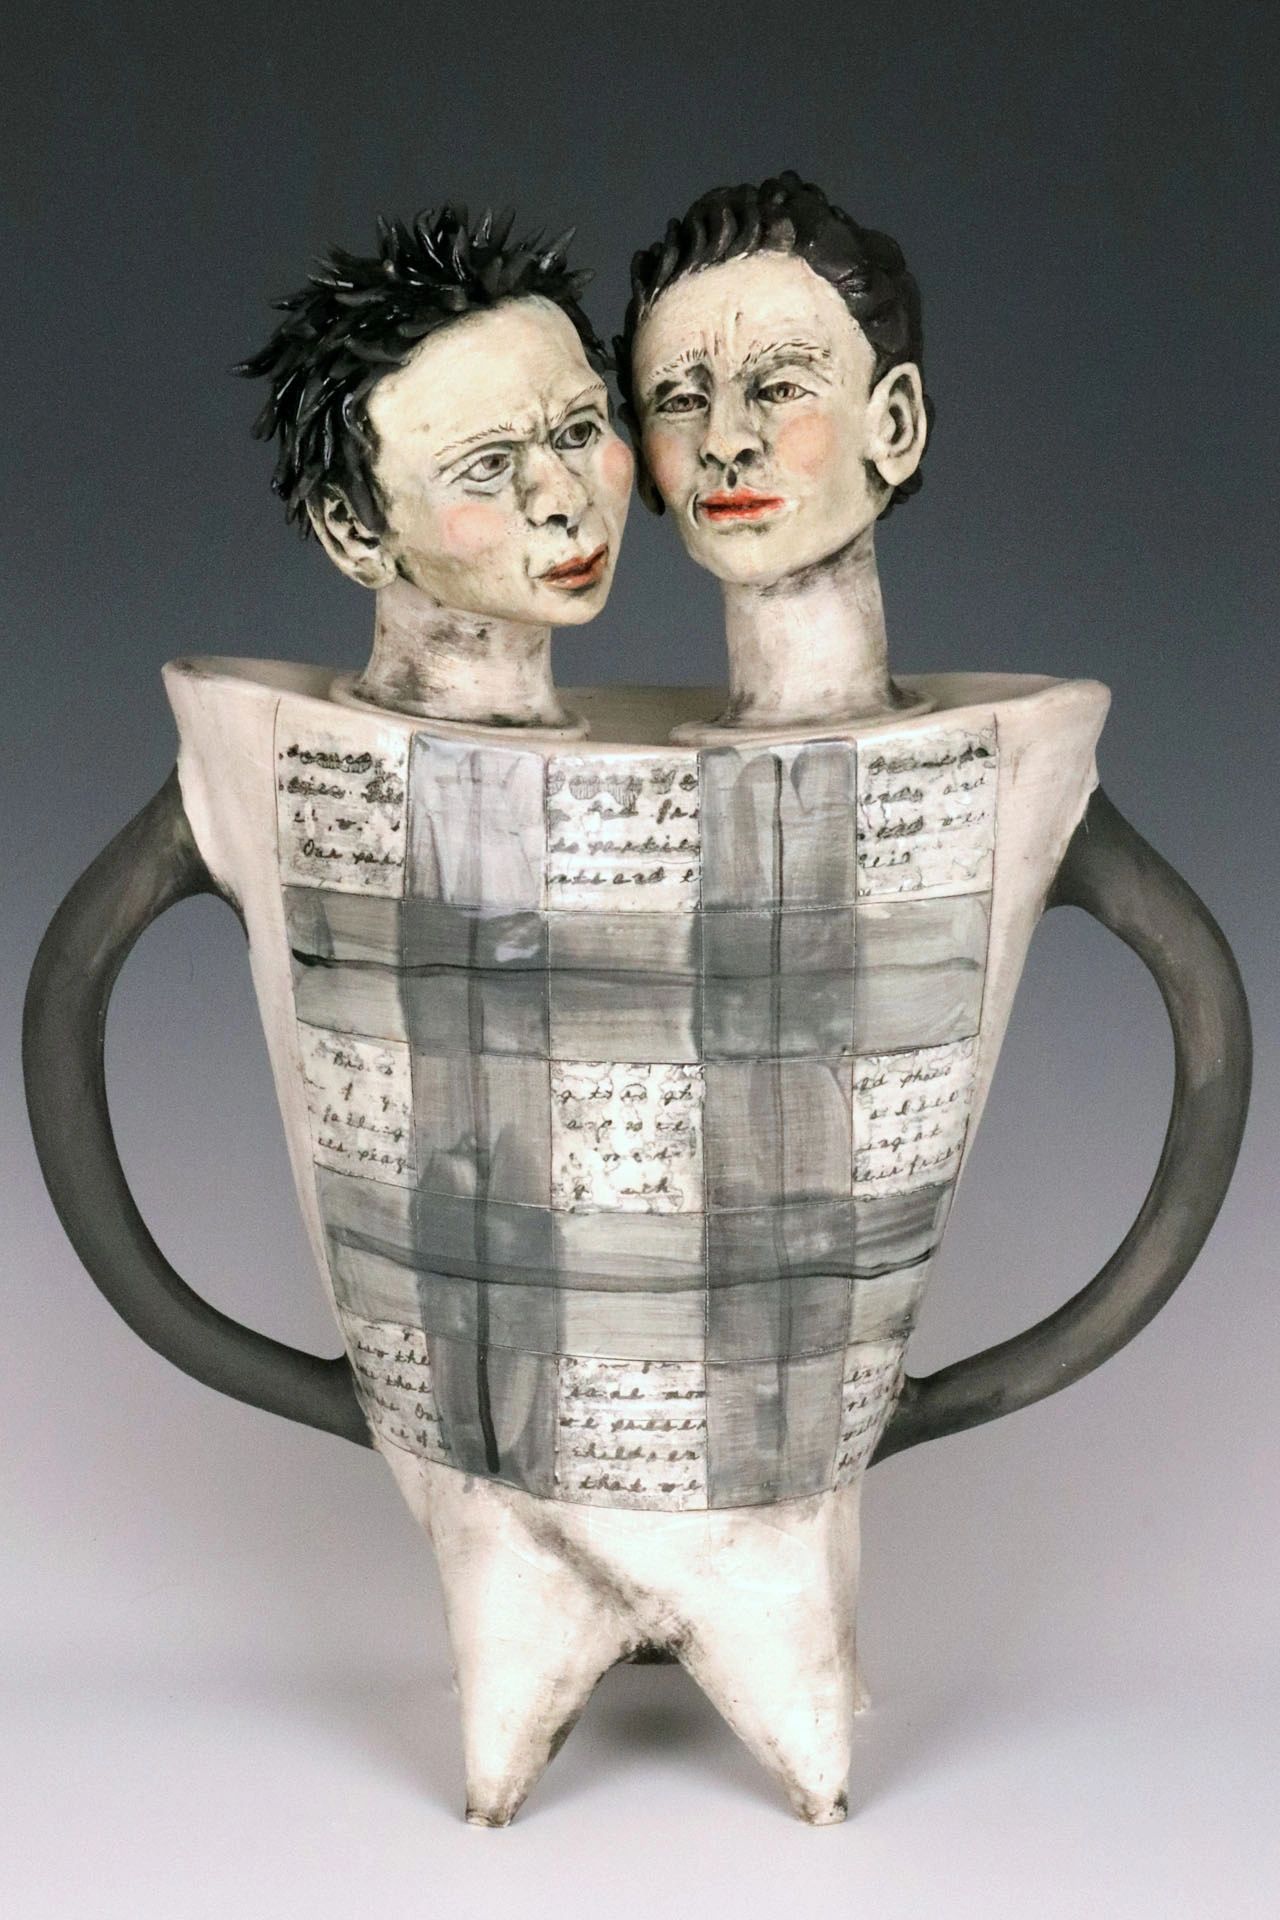 Vessel with two heads. An essay obscured.     15 x 12 x 5" inches 
$425